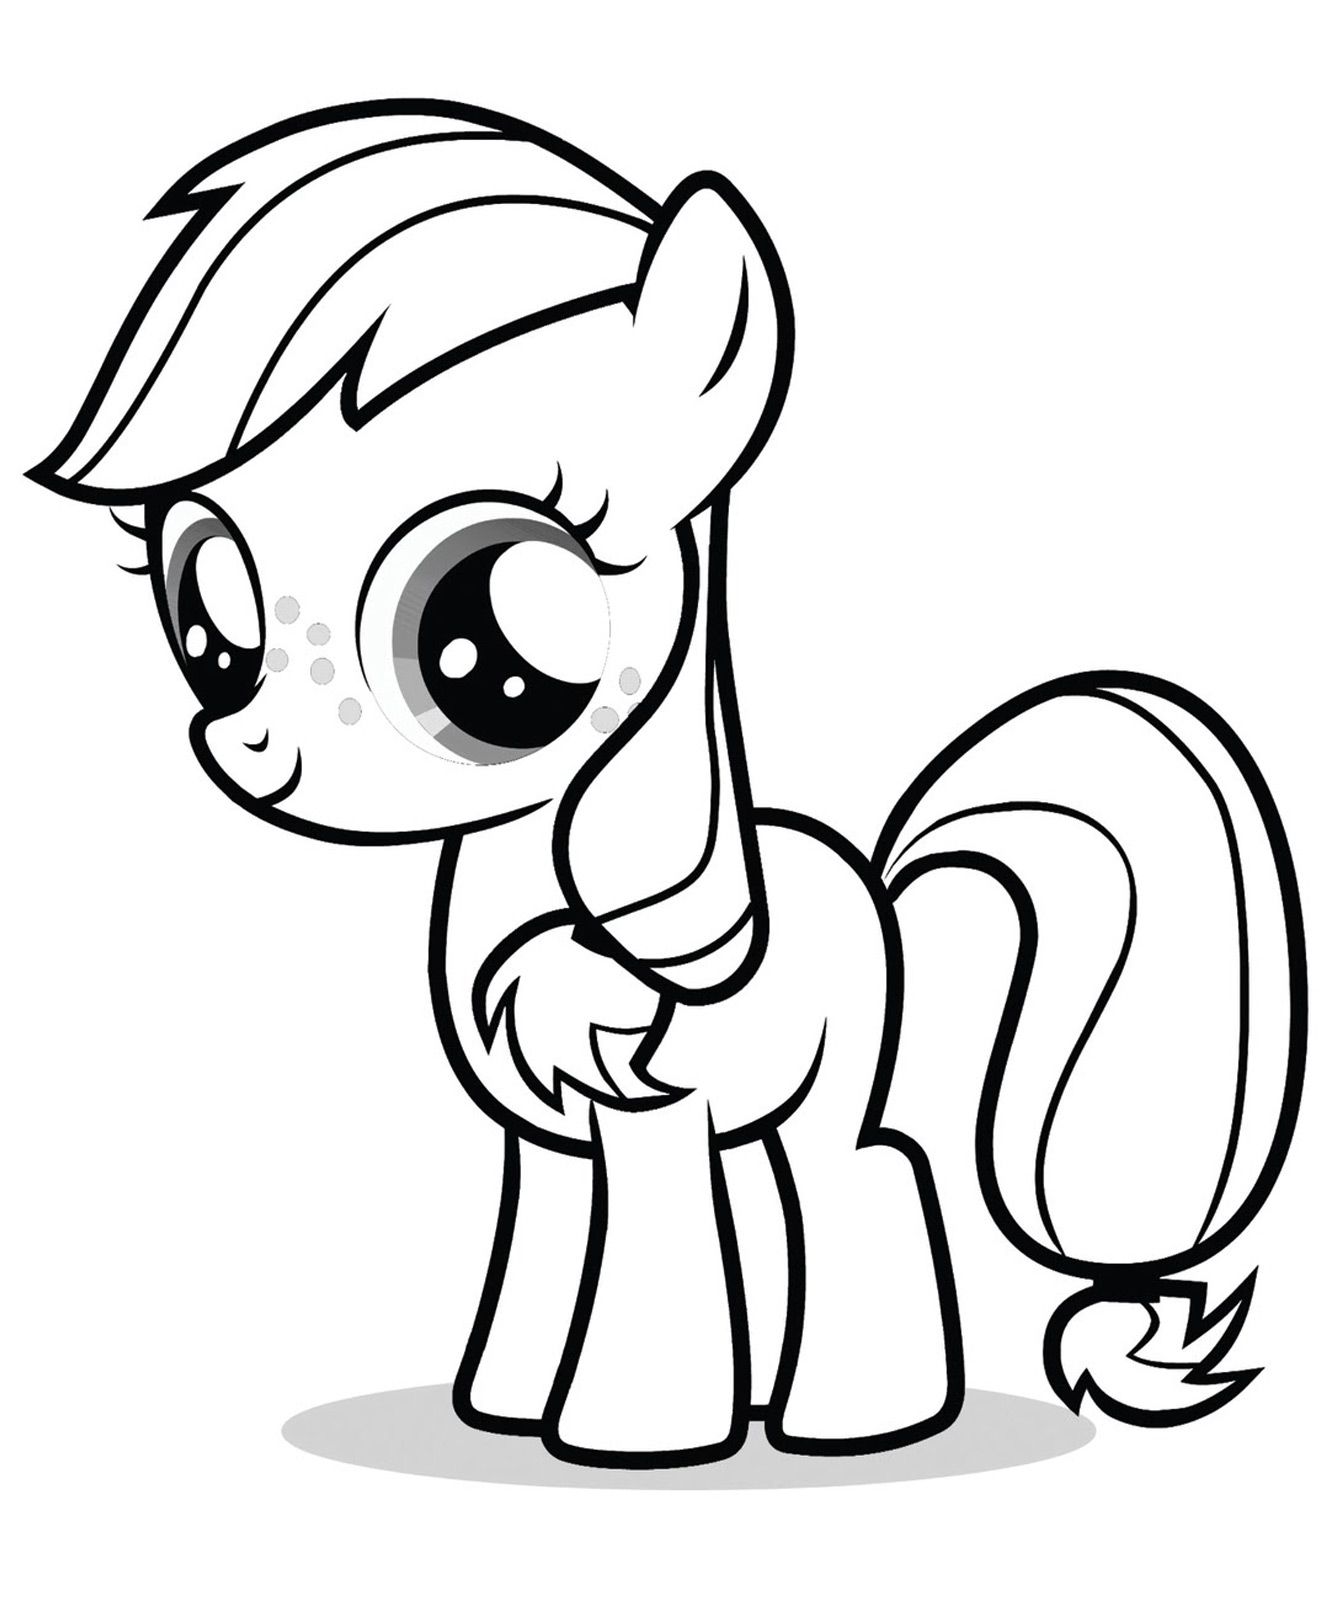 Free Coloring Pages Of Ponies - High Quality Coloring Pages